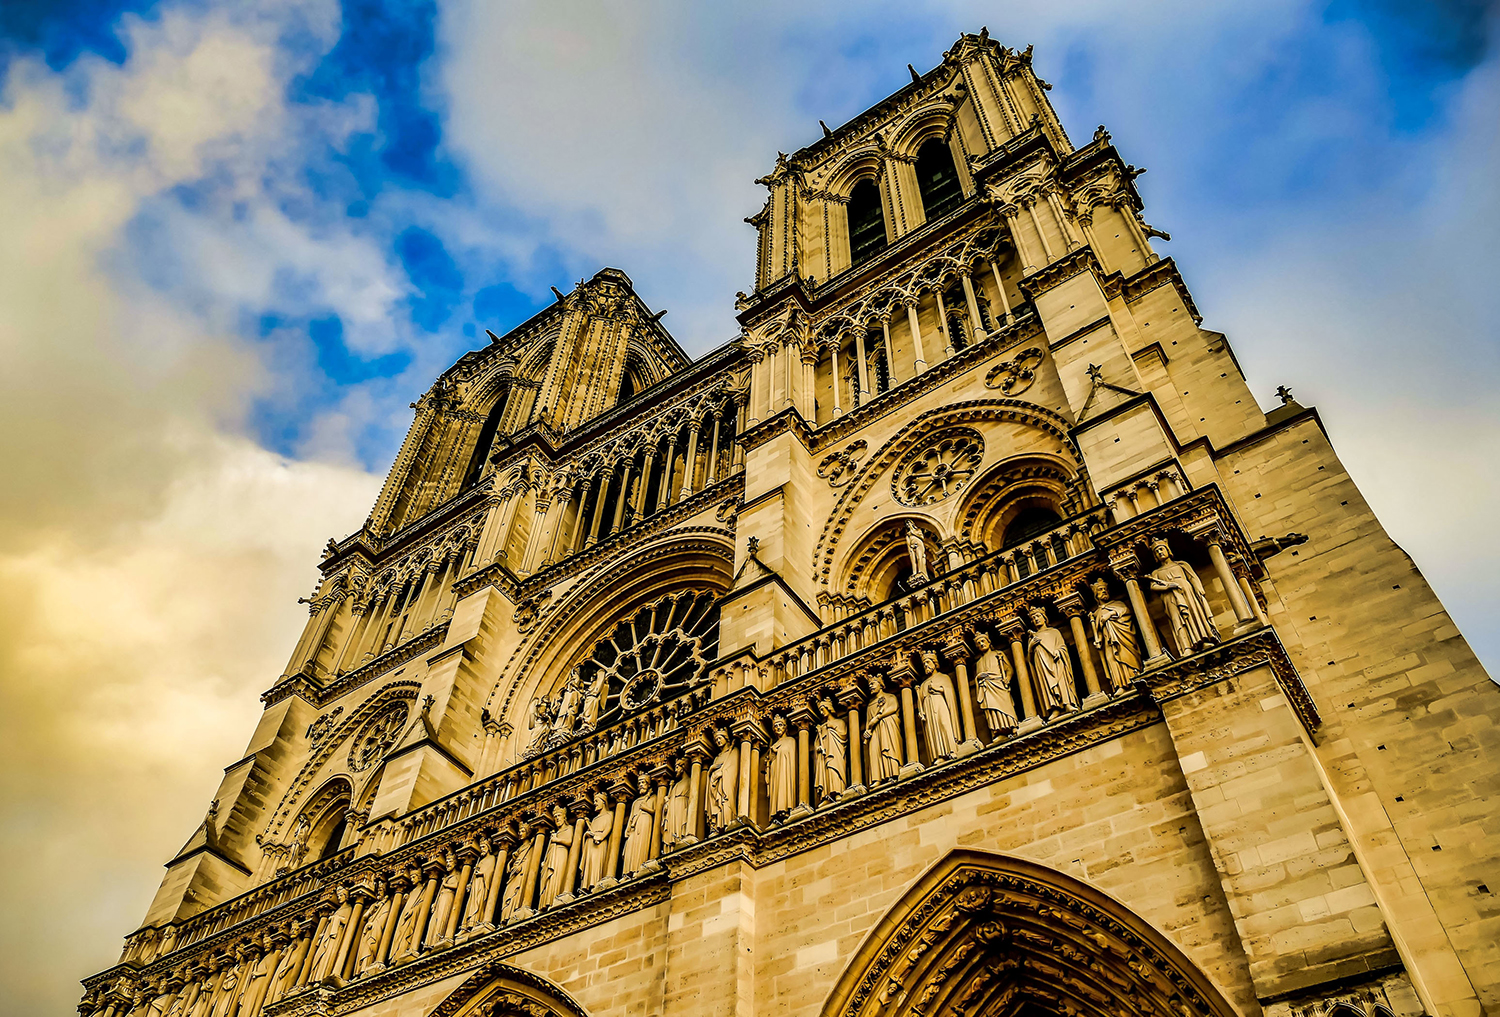 The Notre Dame Cathedral in Paris